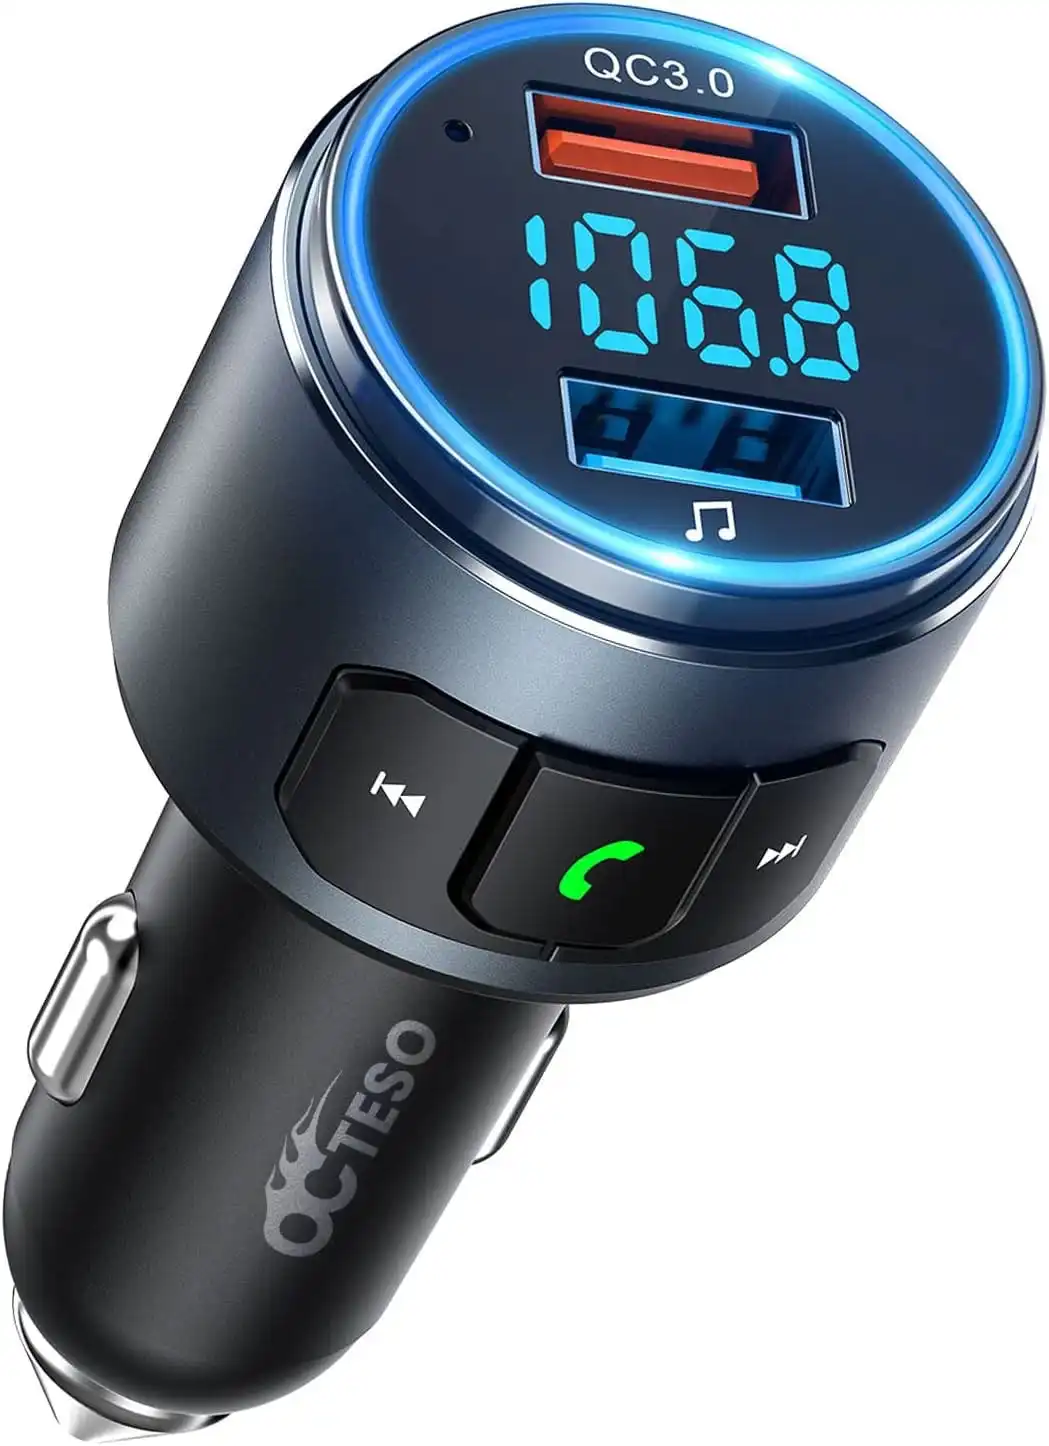 VicTsing (Upgraded Version) V5.0 Bluetooth FM Transmitter for Car, QC3.0 &  LED Backlit Wireless Bluetooth FM Radio Adapter Music Player /Car Kit with, The Gadget Collective